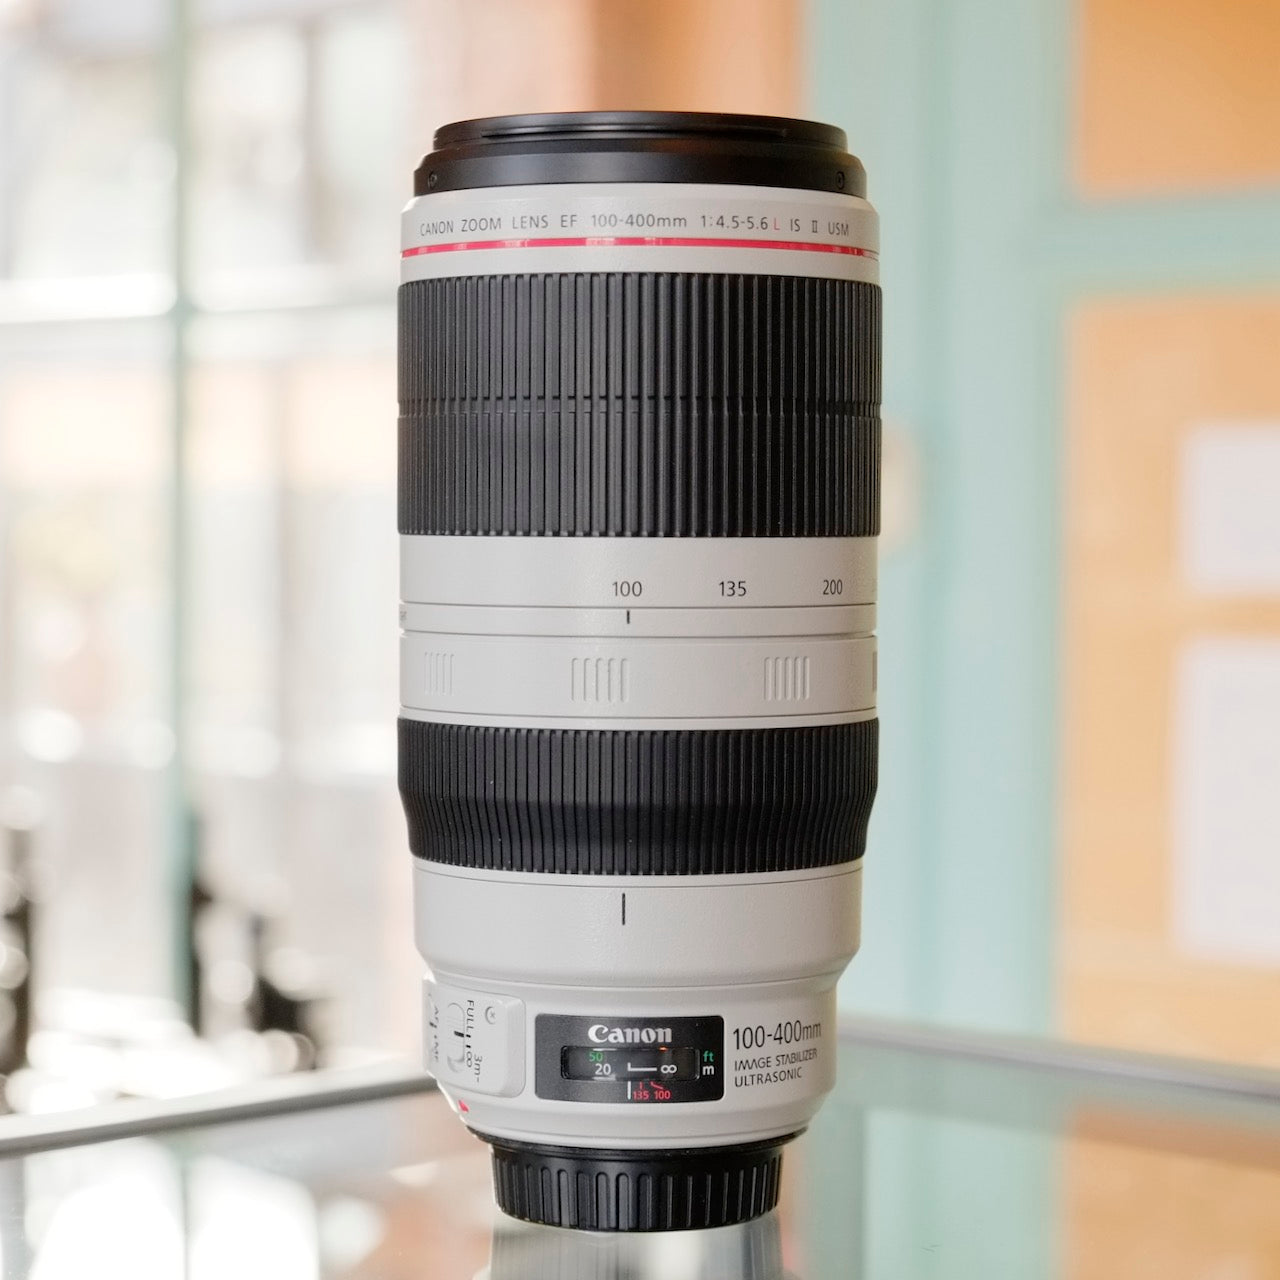 Canon EF 100-400mm f/4.5-5.6L IS II USM.